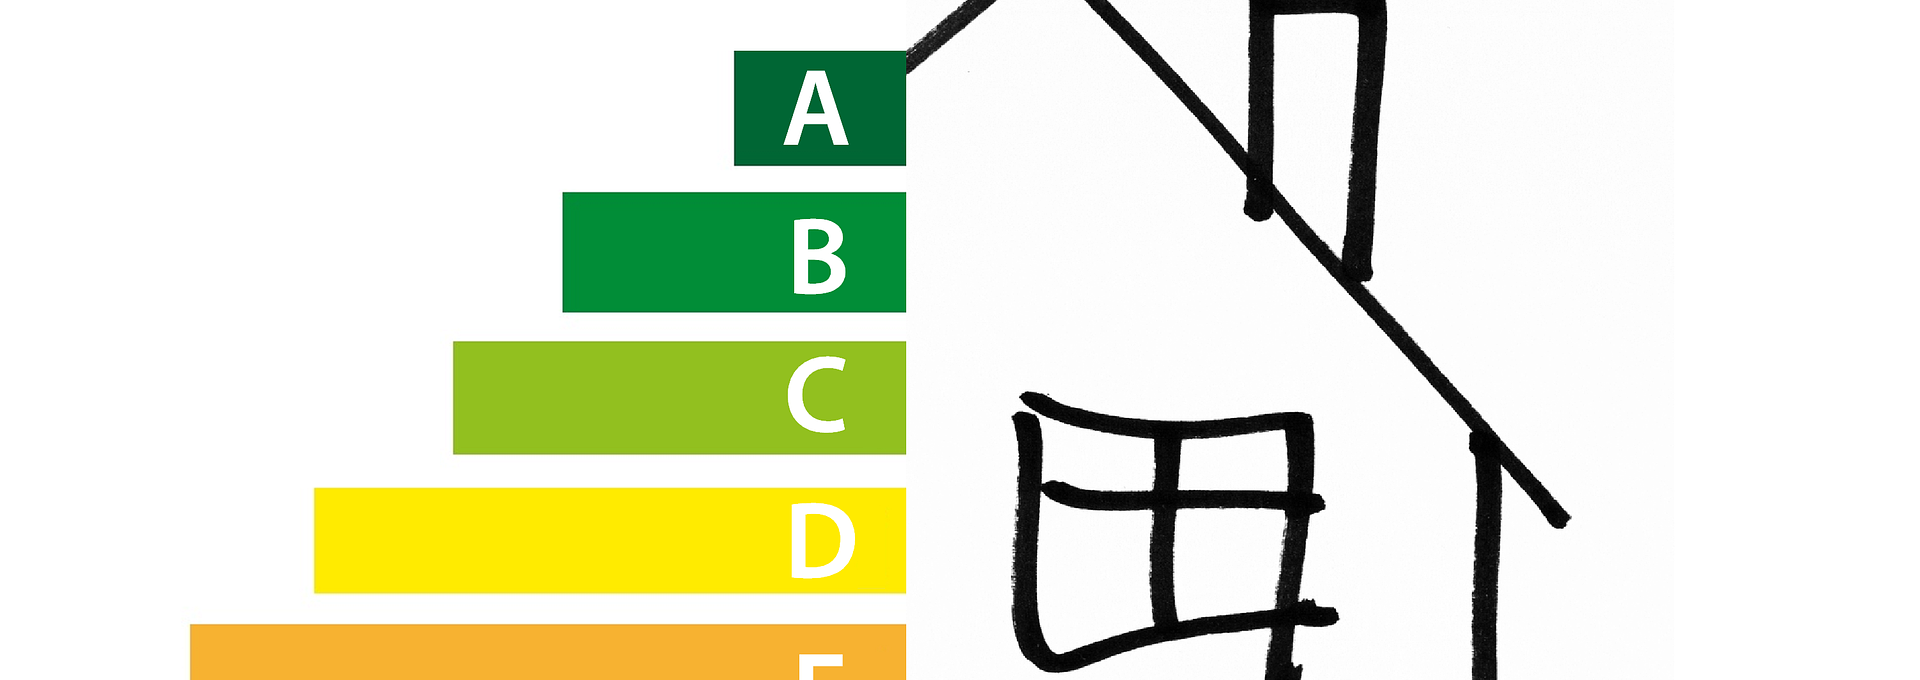 Energy efficiency colours with house drawing